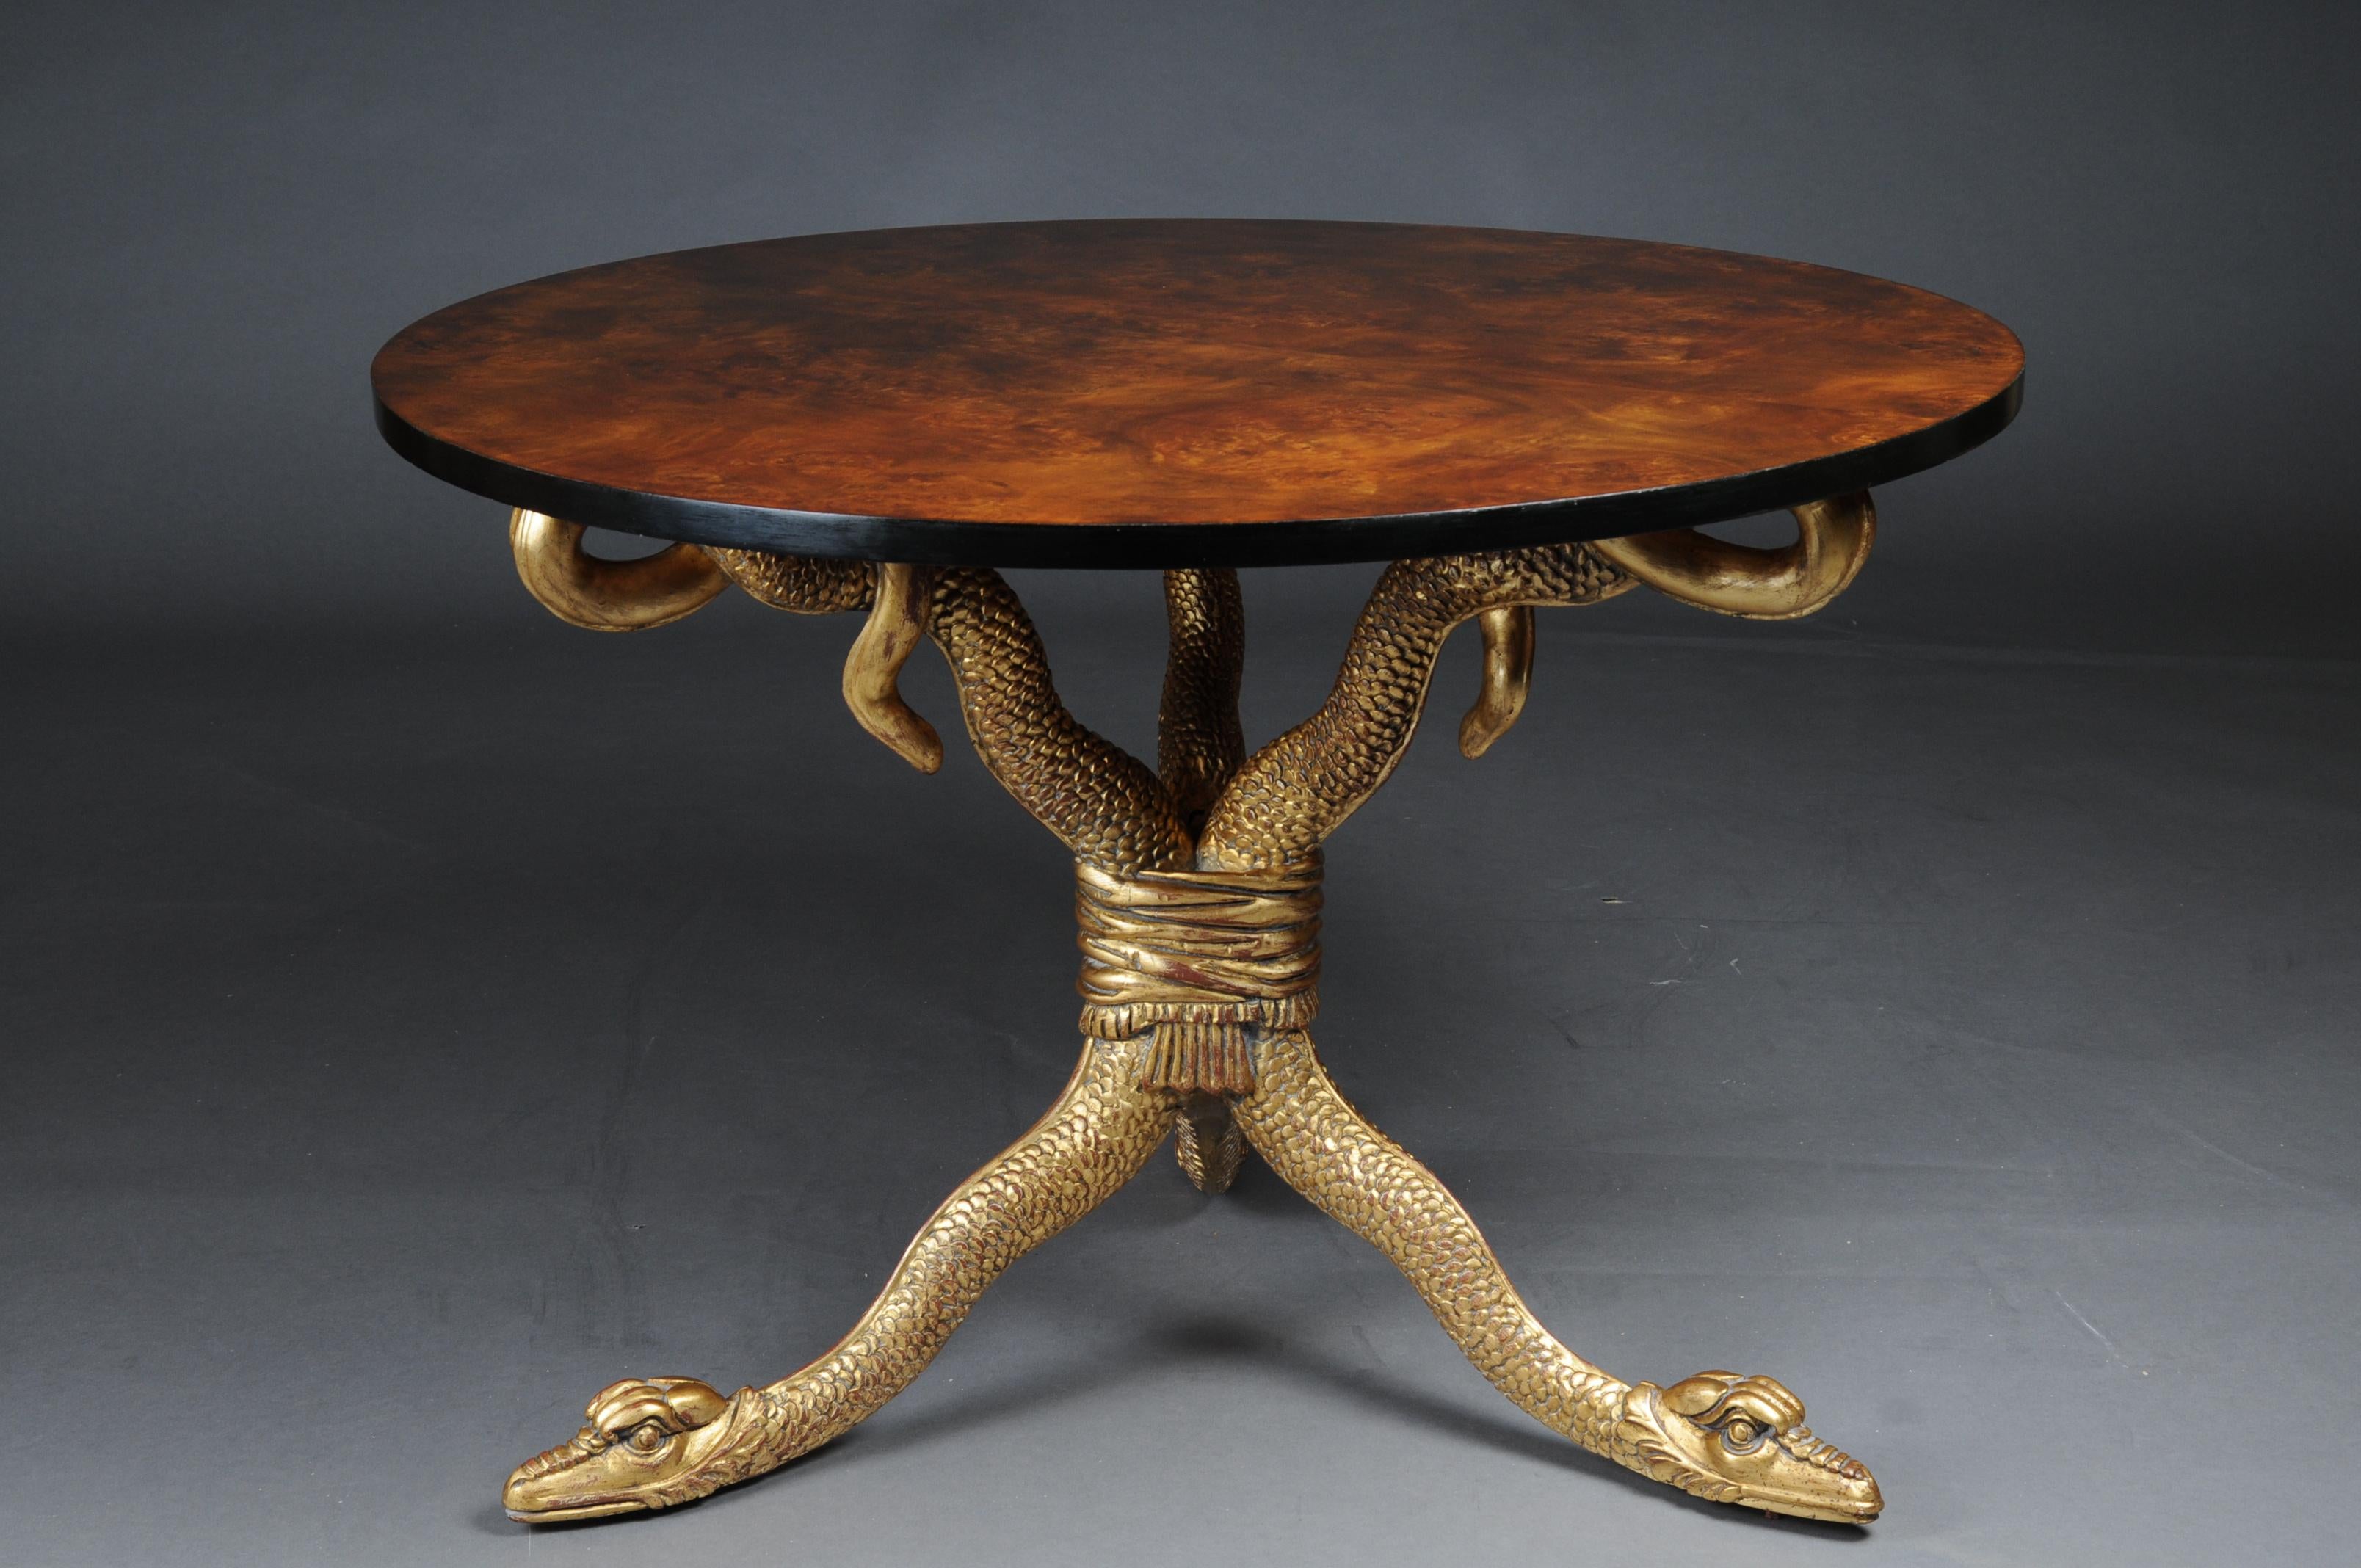 20th century snake table design after K. F. Schinkel Empire manner

Three fully plastic snakes carved from solid beech wood and gilded with poliment. The beatings are on a three-sided raised base plate. Maple root veneer partially ebonized on solid